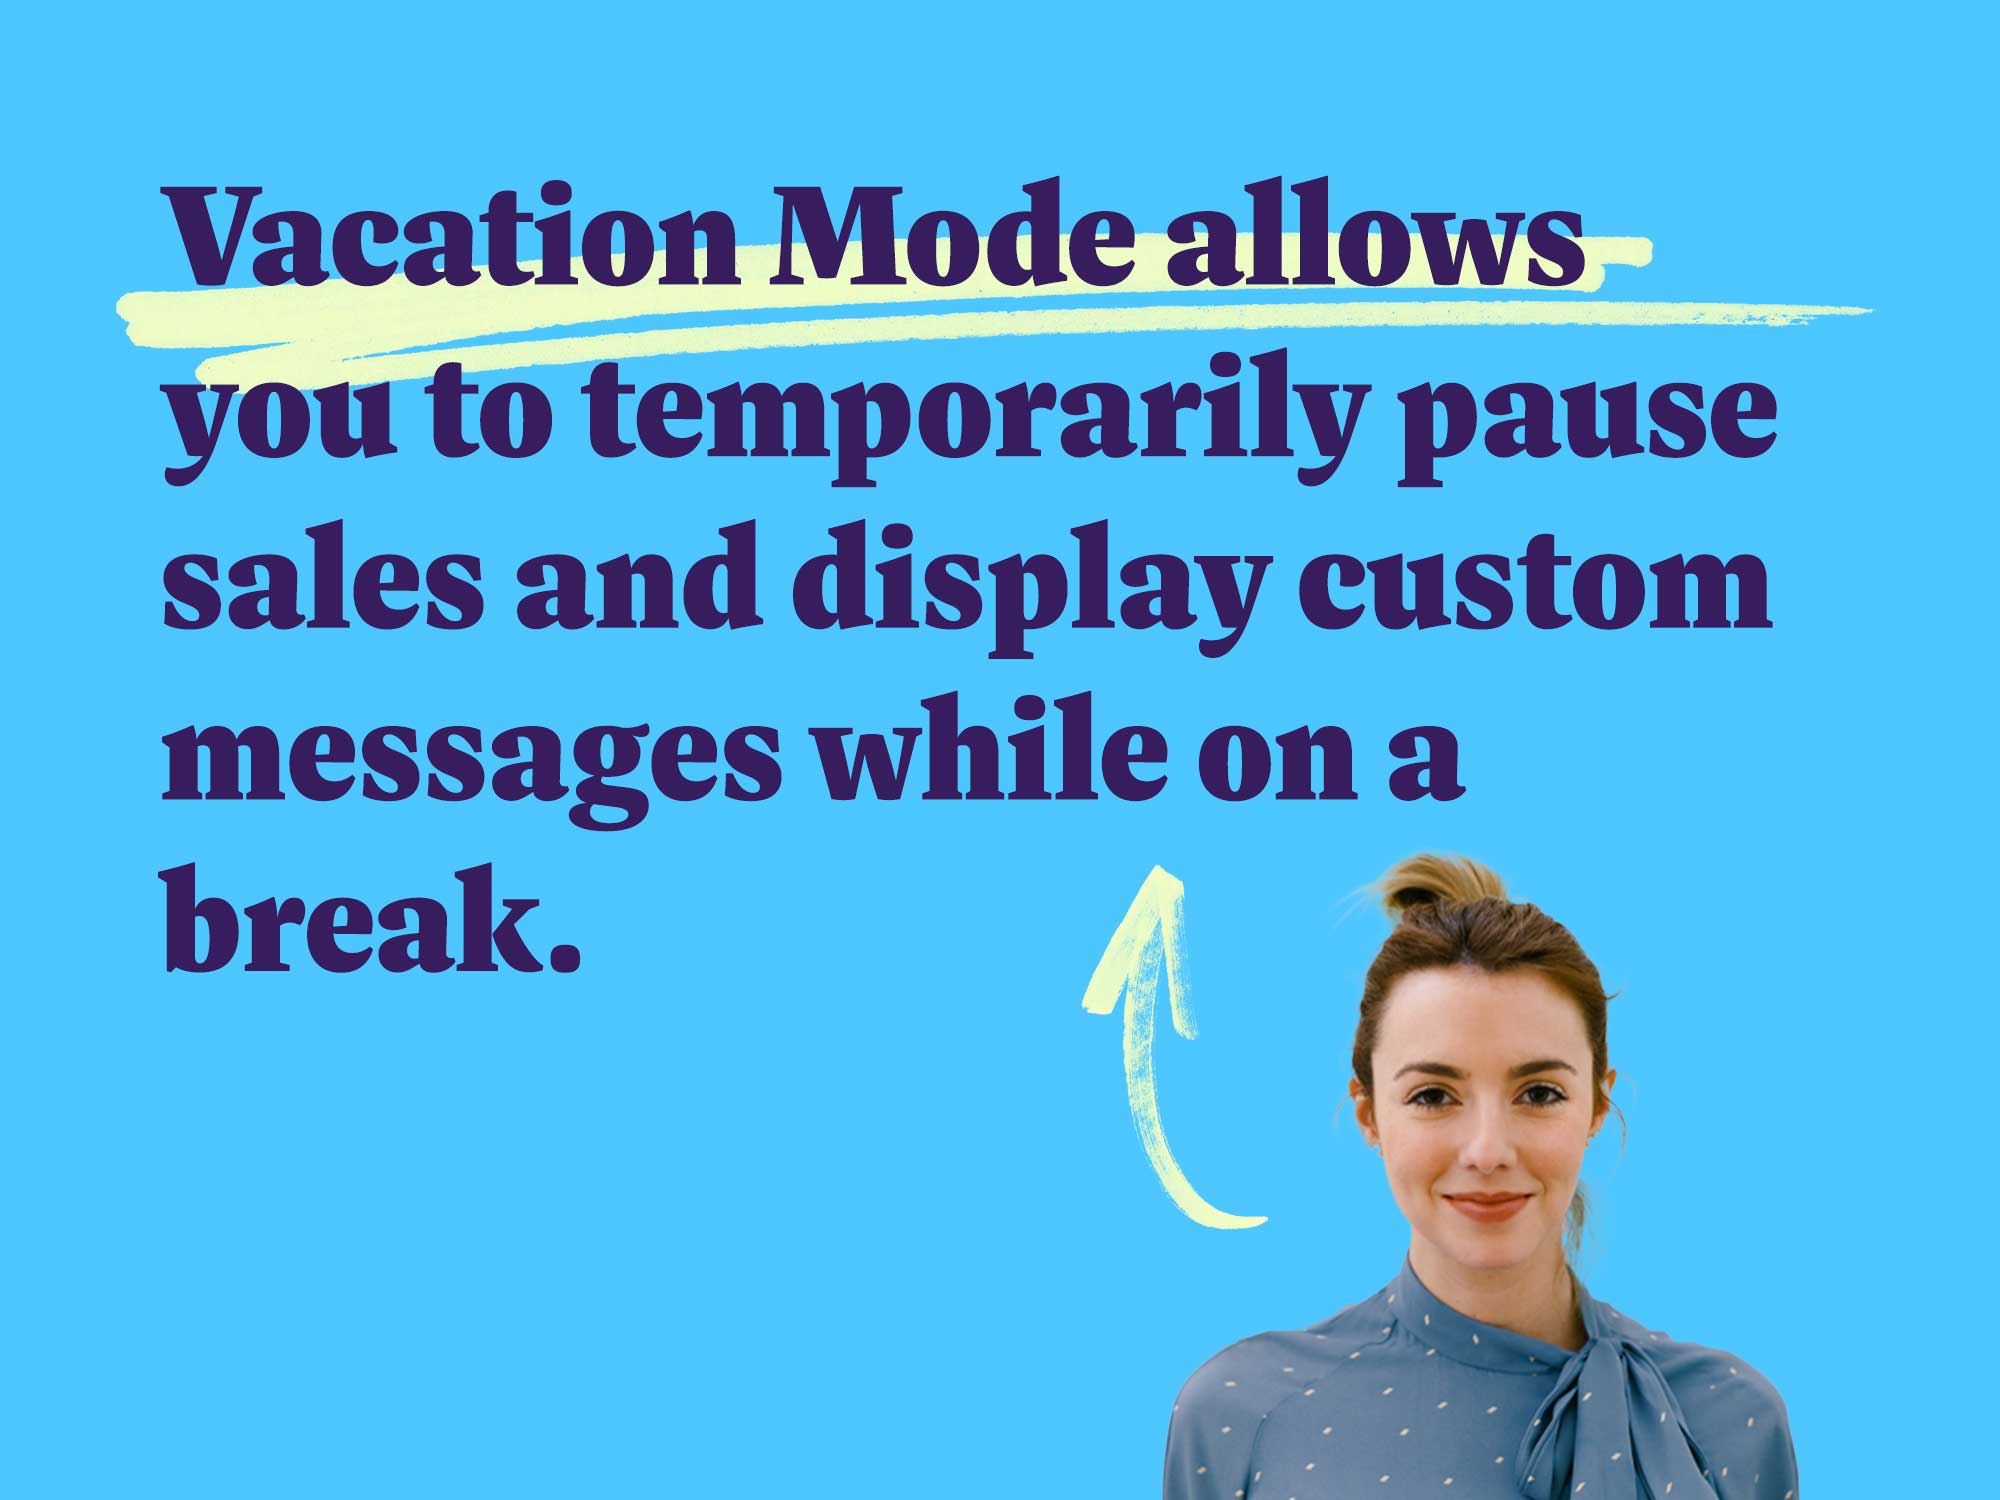 Vacation Mode allows you to temporarily pause sales and display custom messages while on a break.